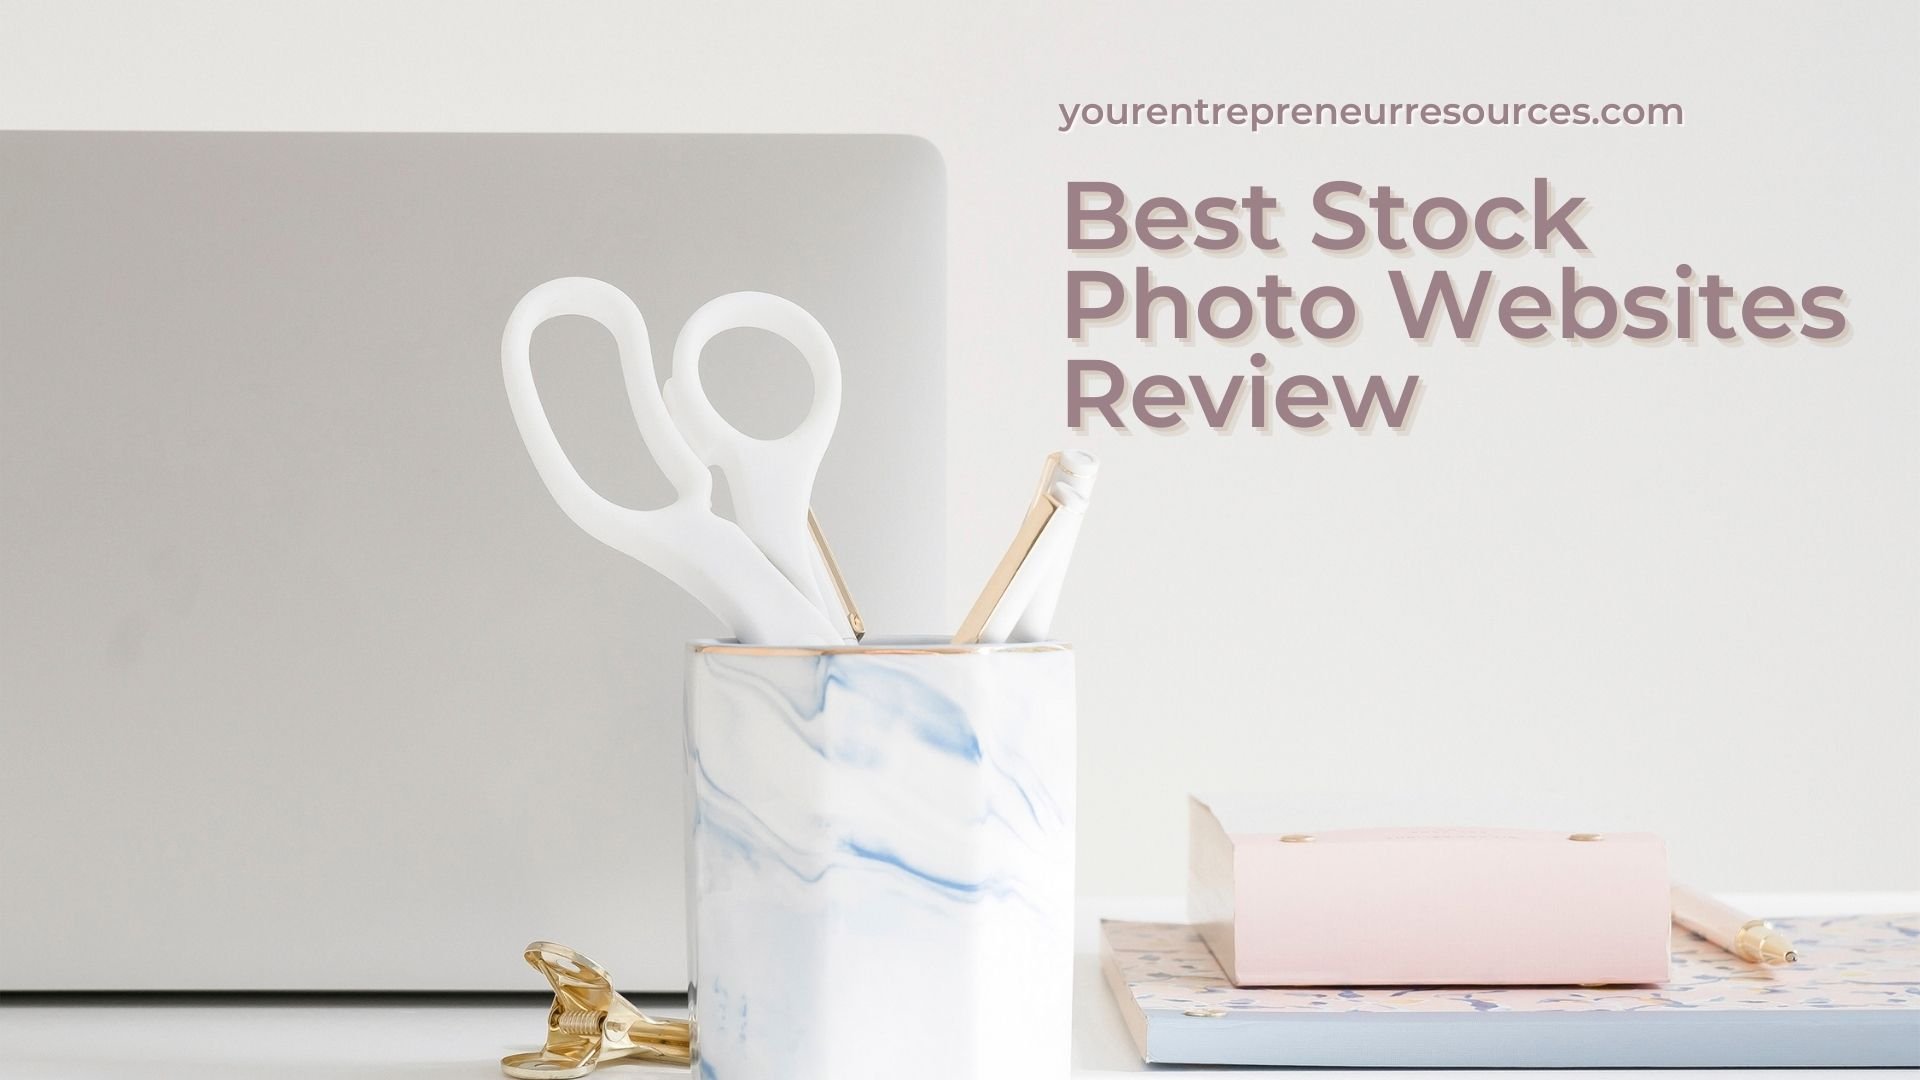 Best Stock Photo websites review Free & Paid Versions